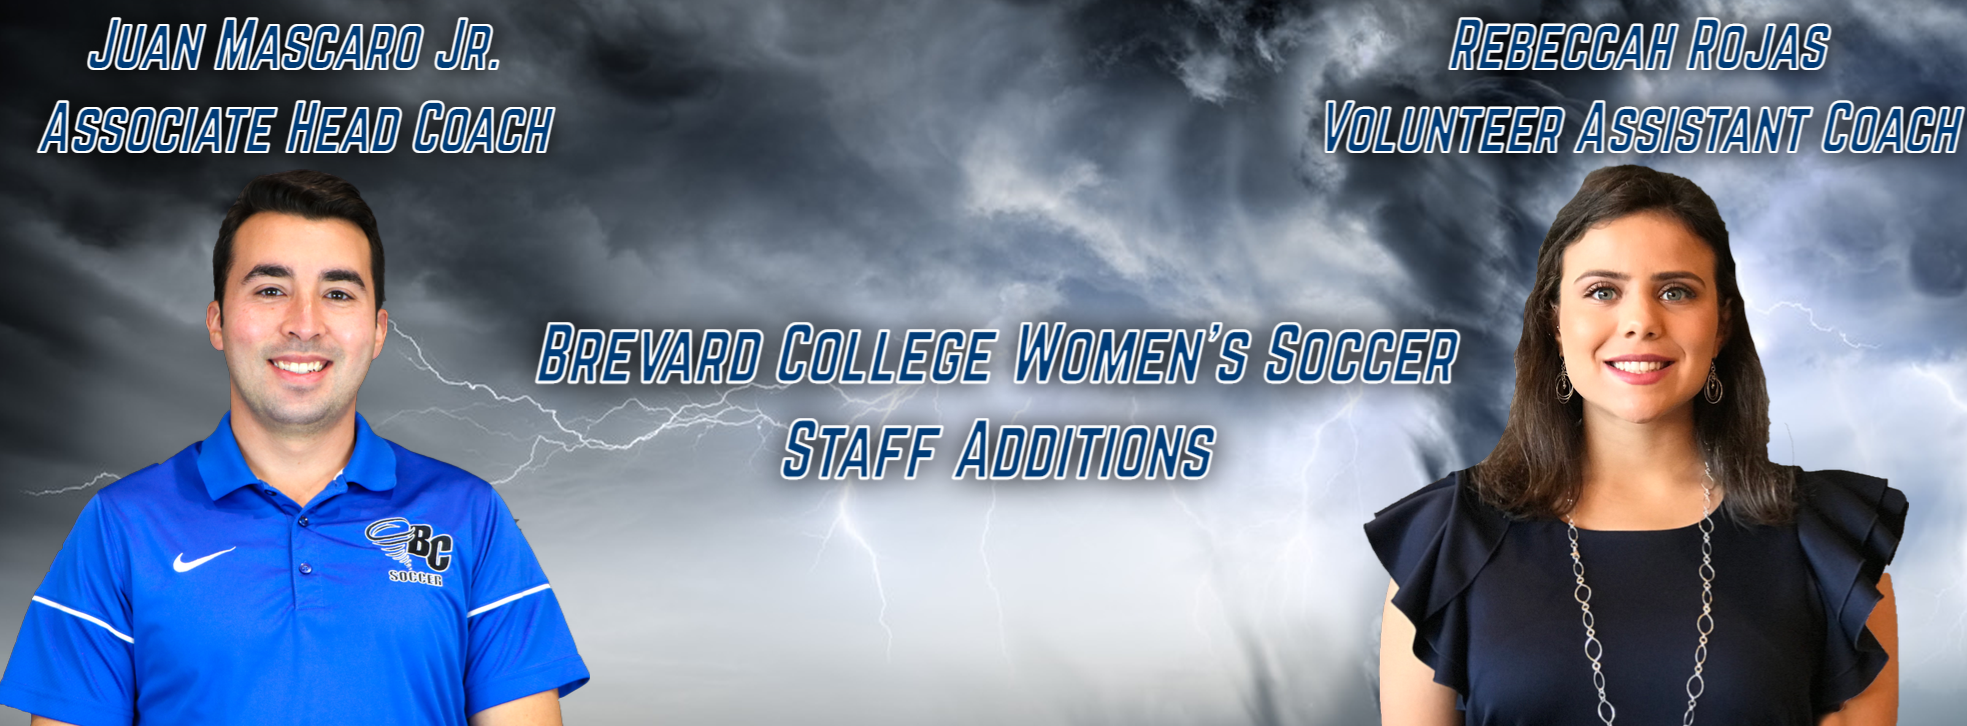 BC Women’s Soccer Announces Coaching Staff Additions